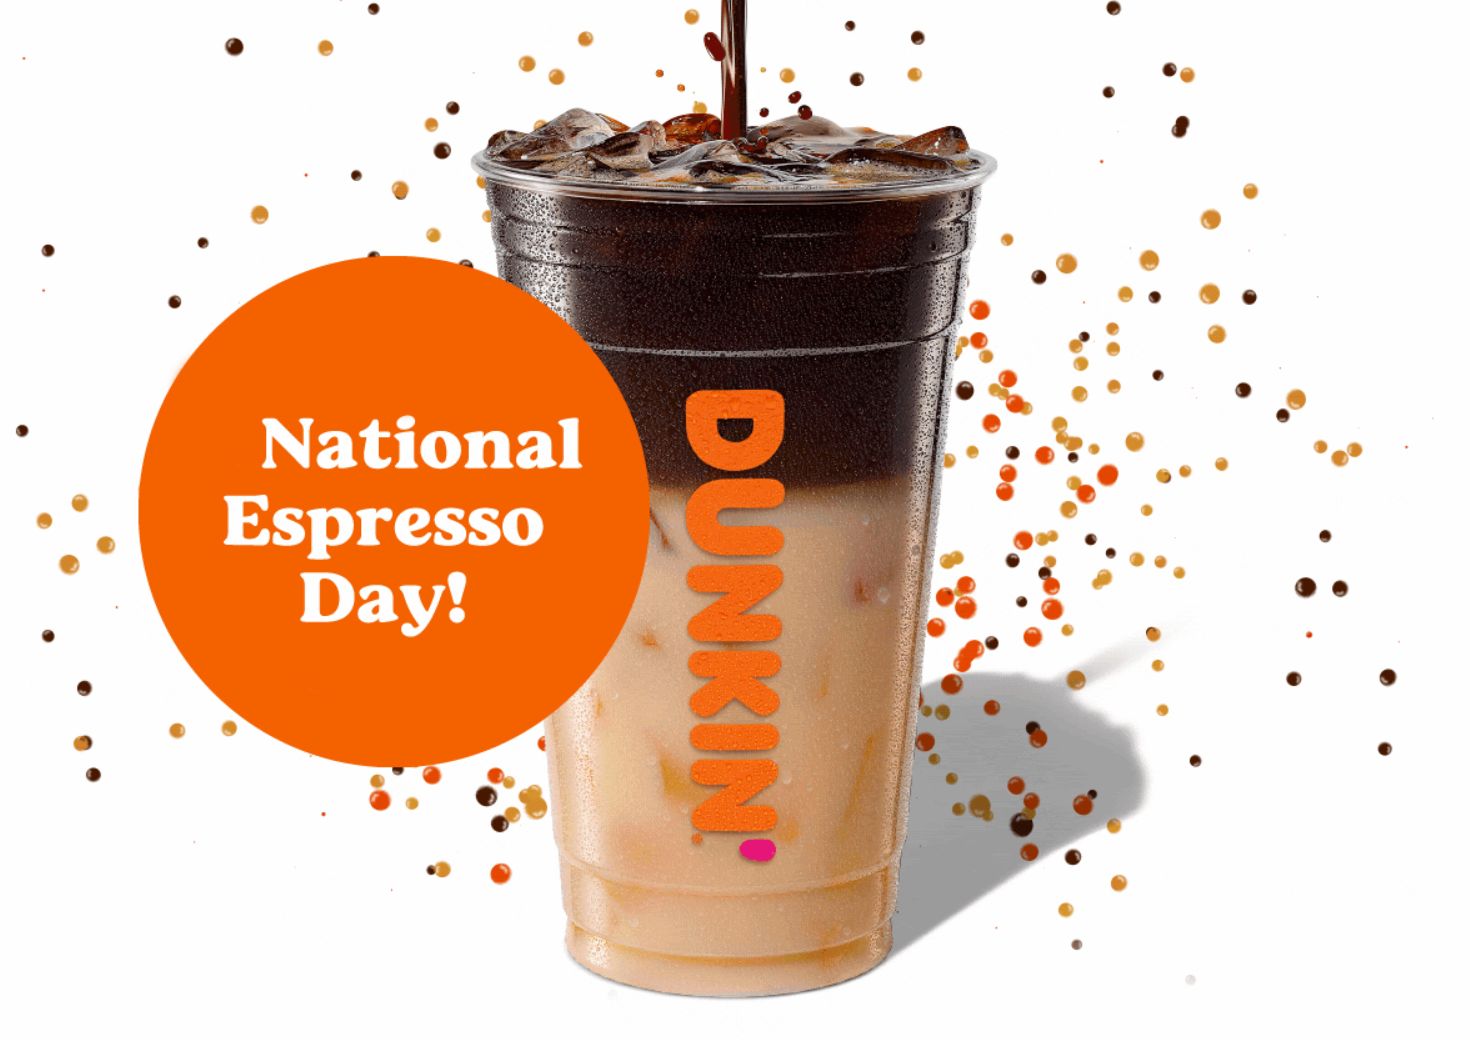 DD Perks Members Can Earn a Free Espresso Drink Reward with Purchase on On National Espresso Day at Dunkin’ Donuts